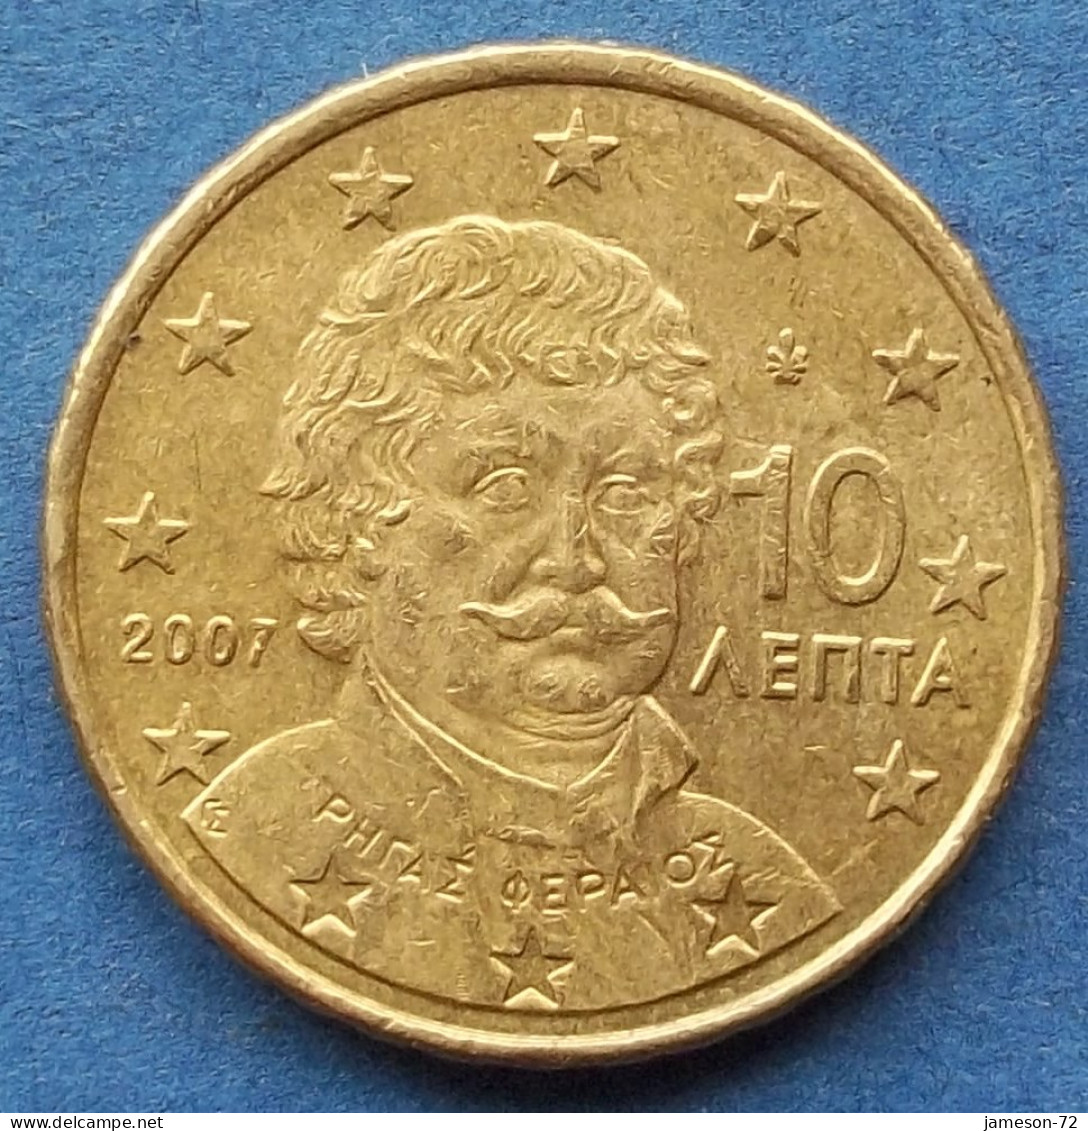 GREECE - 10 Euro Cents 2007 "Rigas Fereos" KM# 211 Euro Coinage (2002) - Edelweiss Coins - Greece